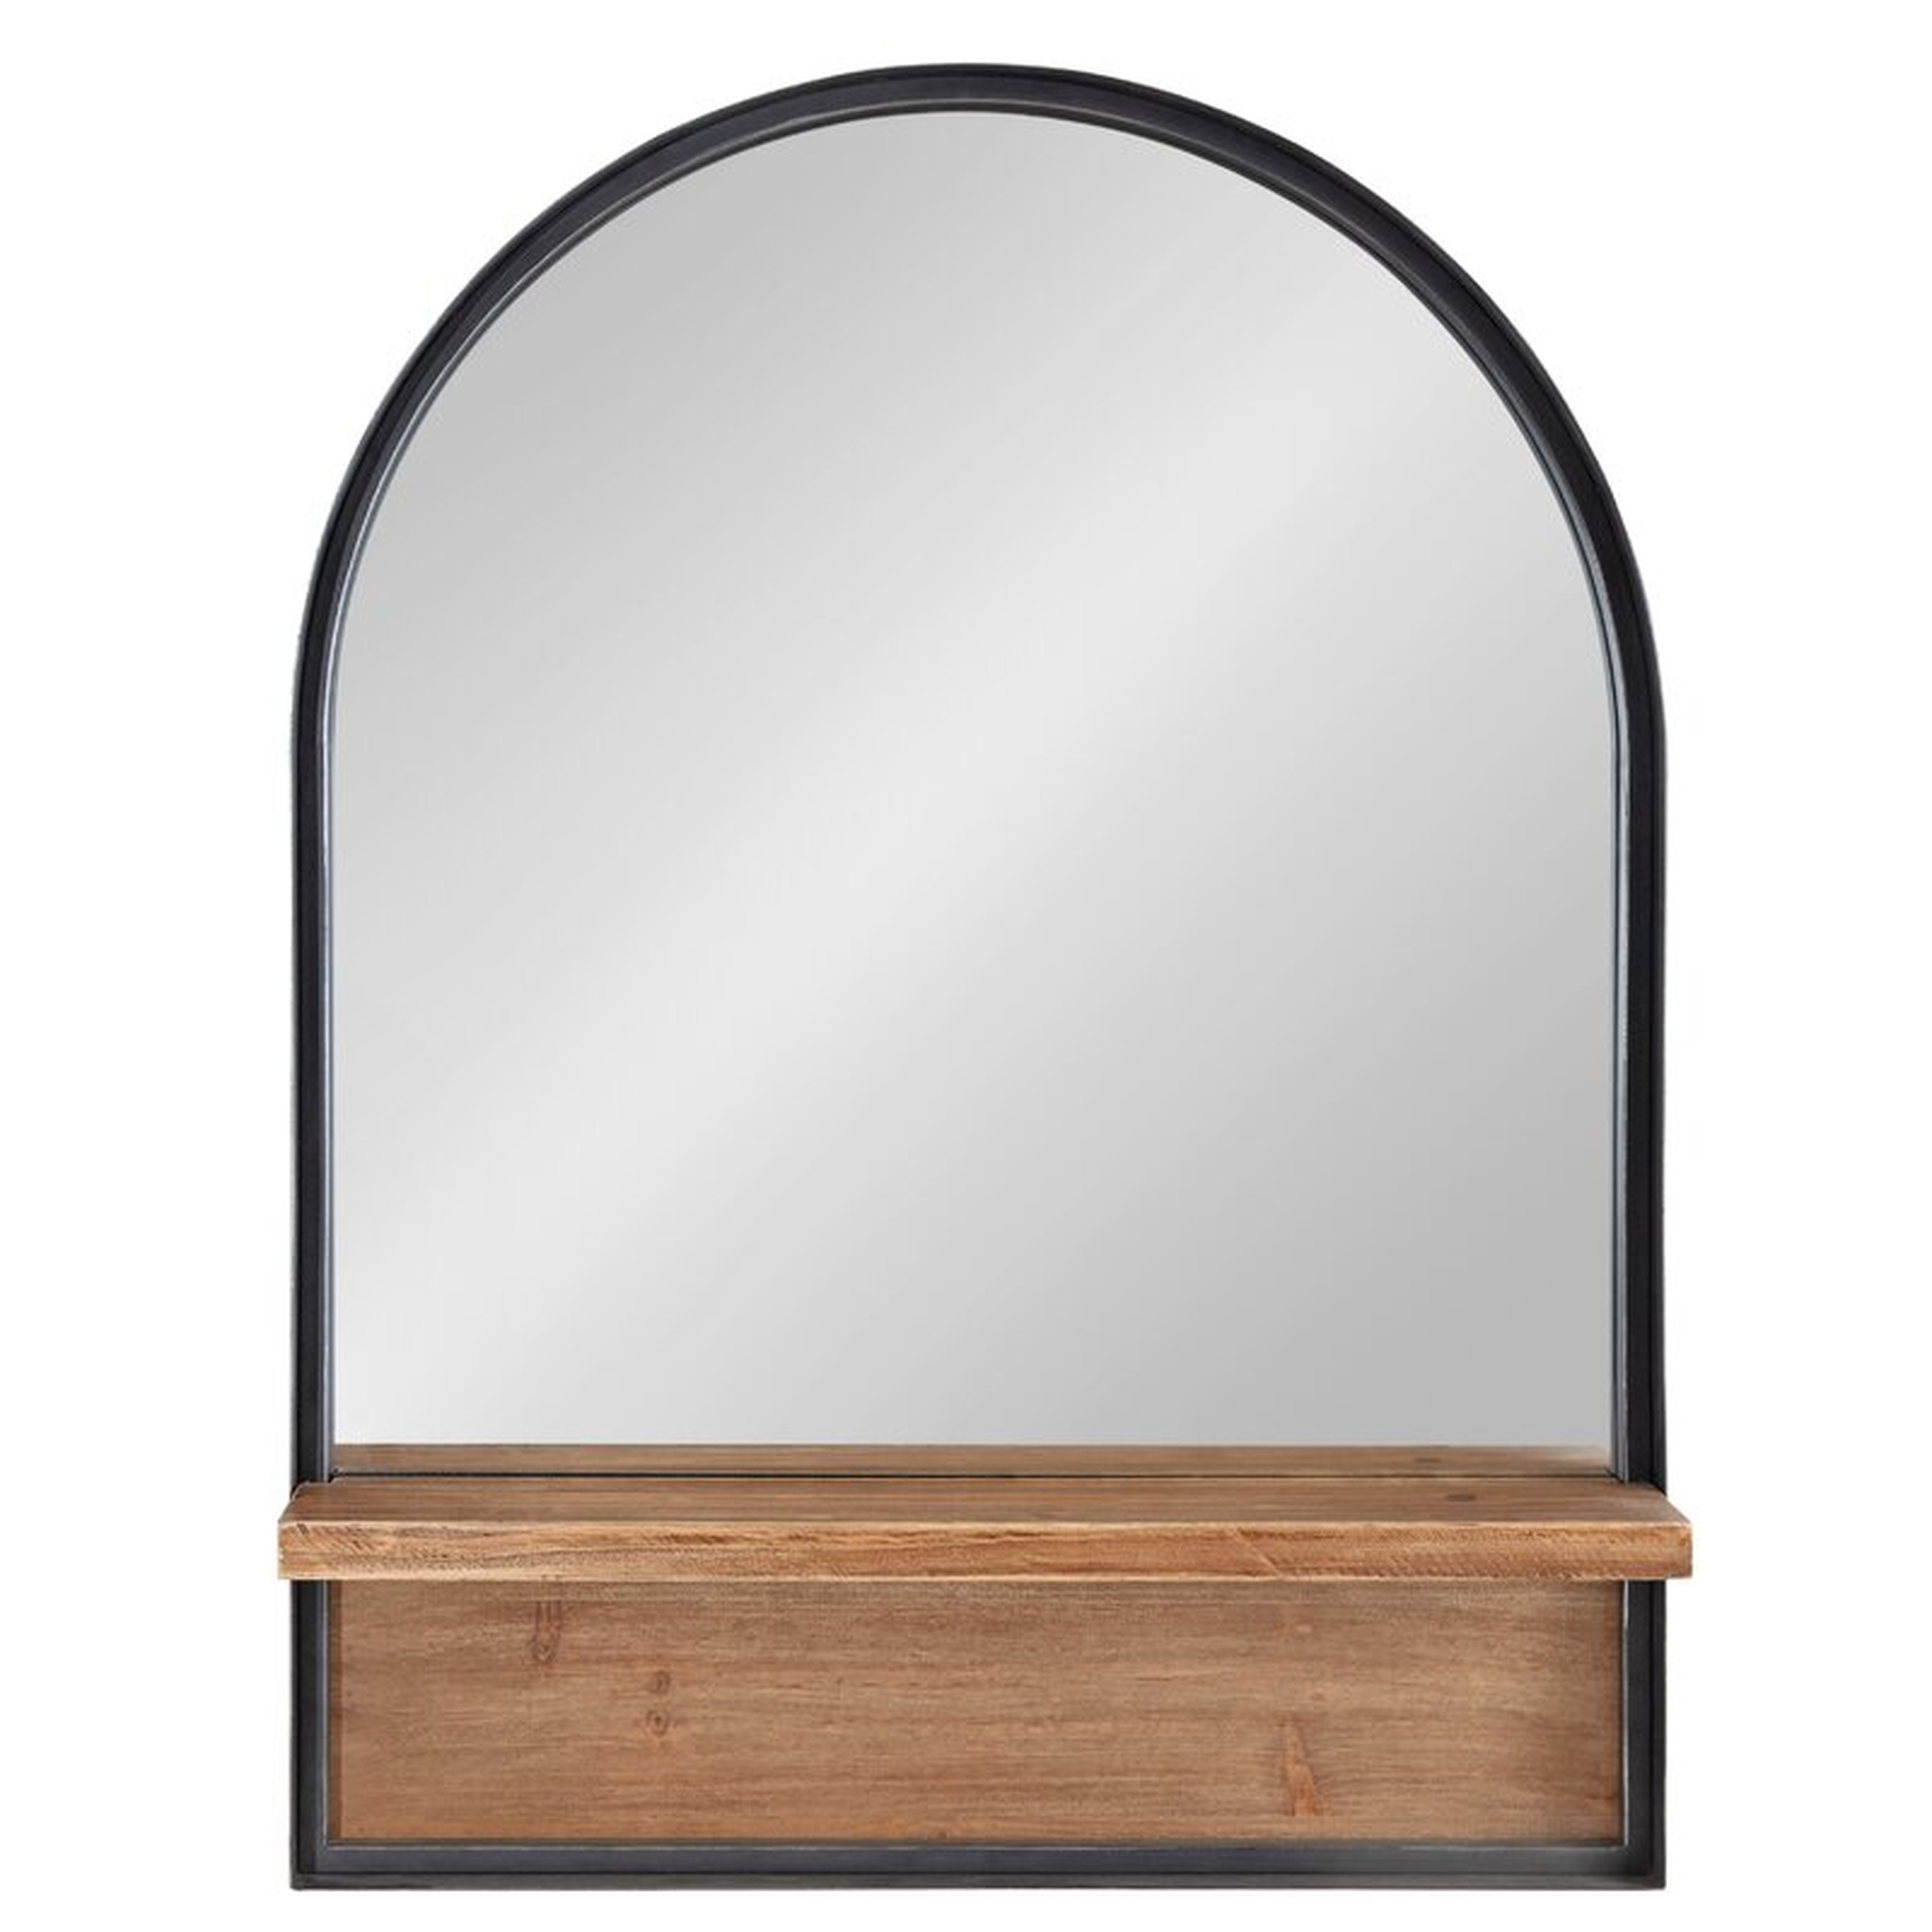 Catoosa Distressed with Shelves Accent Mirror - Wayfair